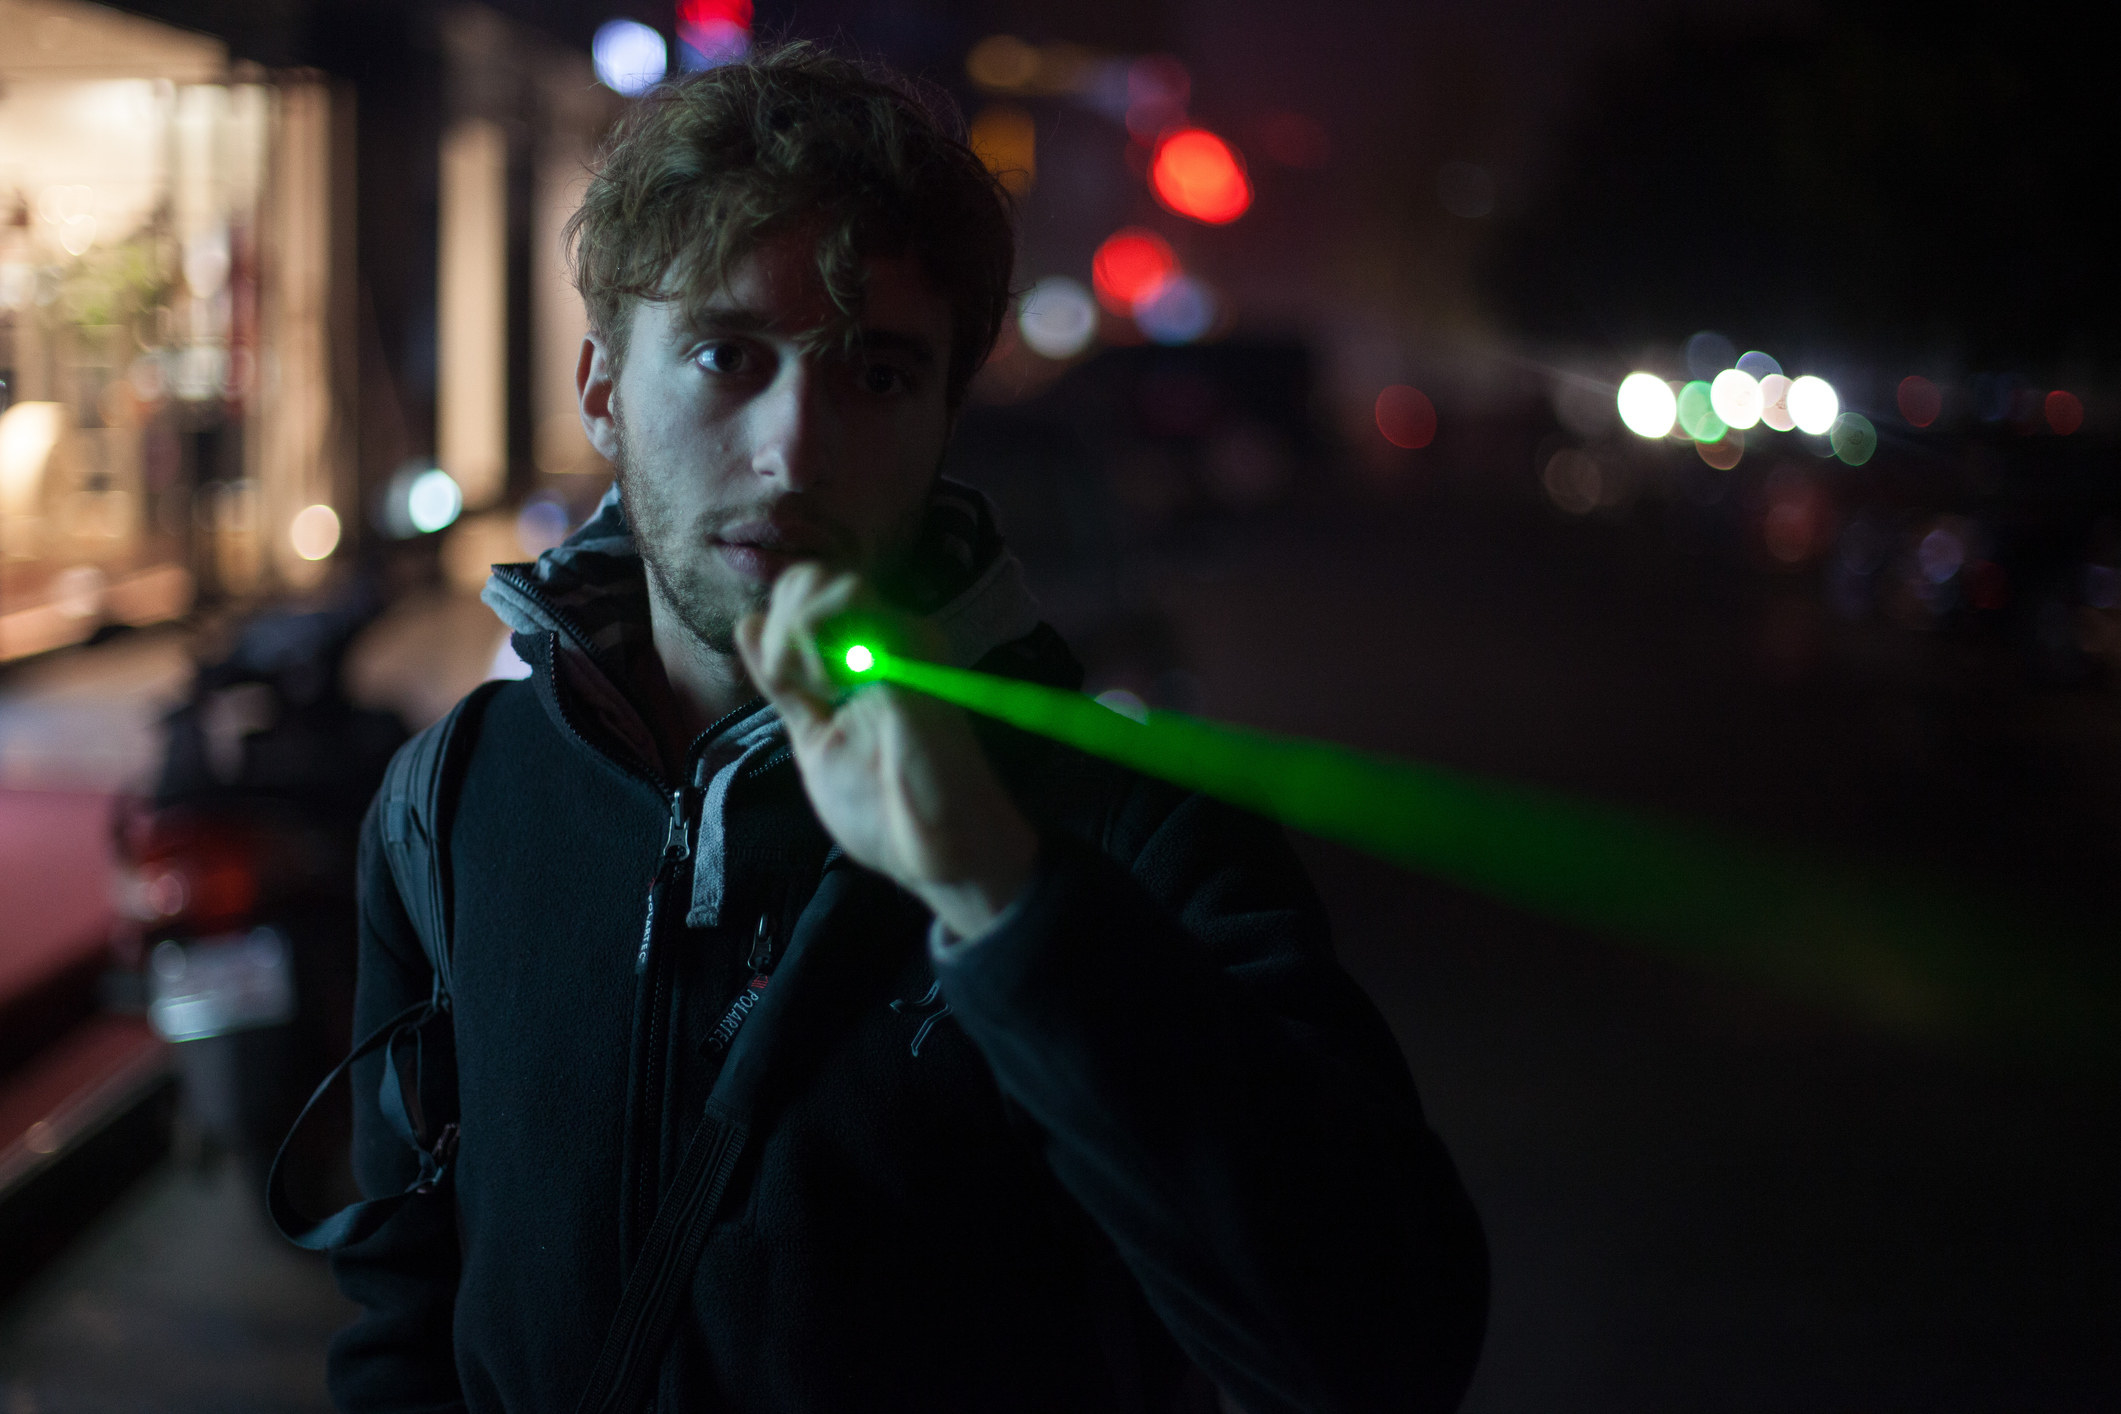 A photo of man shinning his laser pointer on the street at night